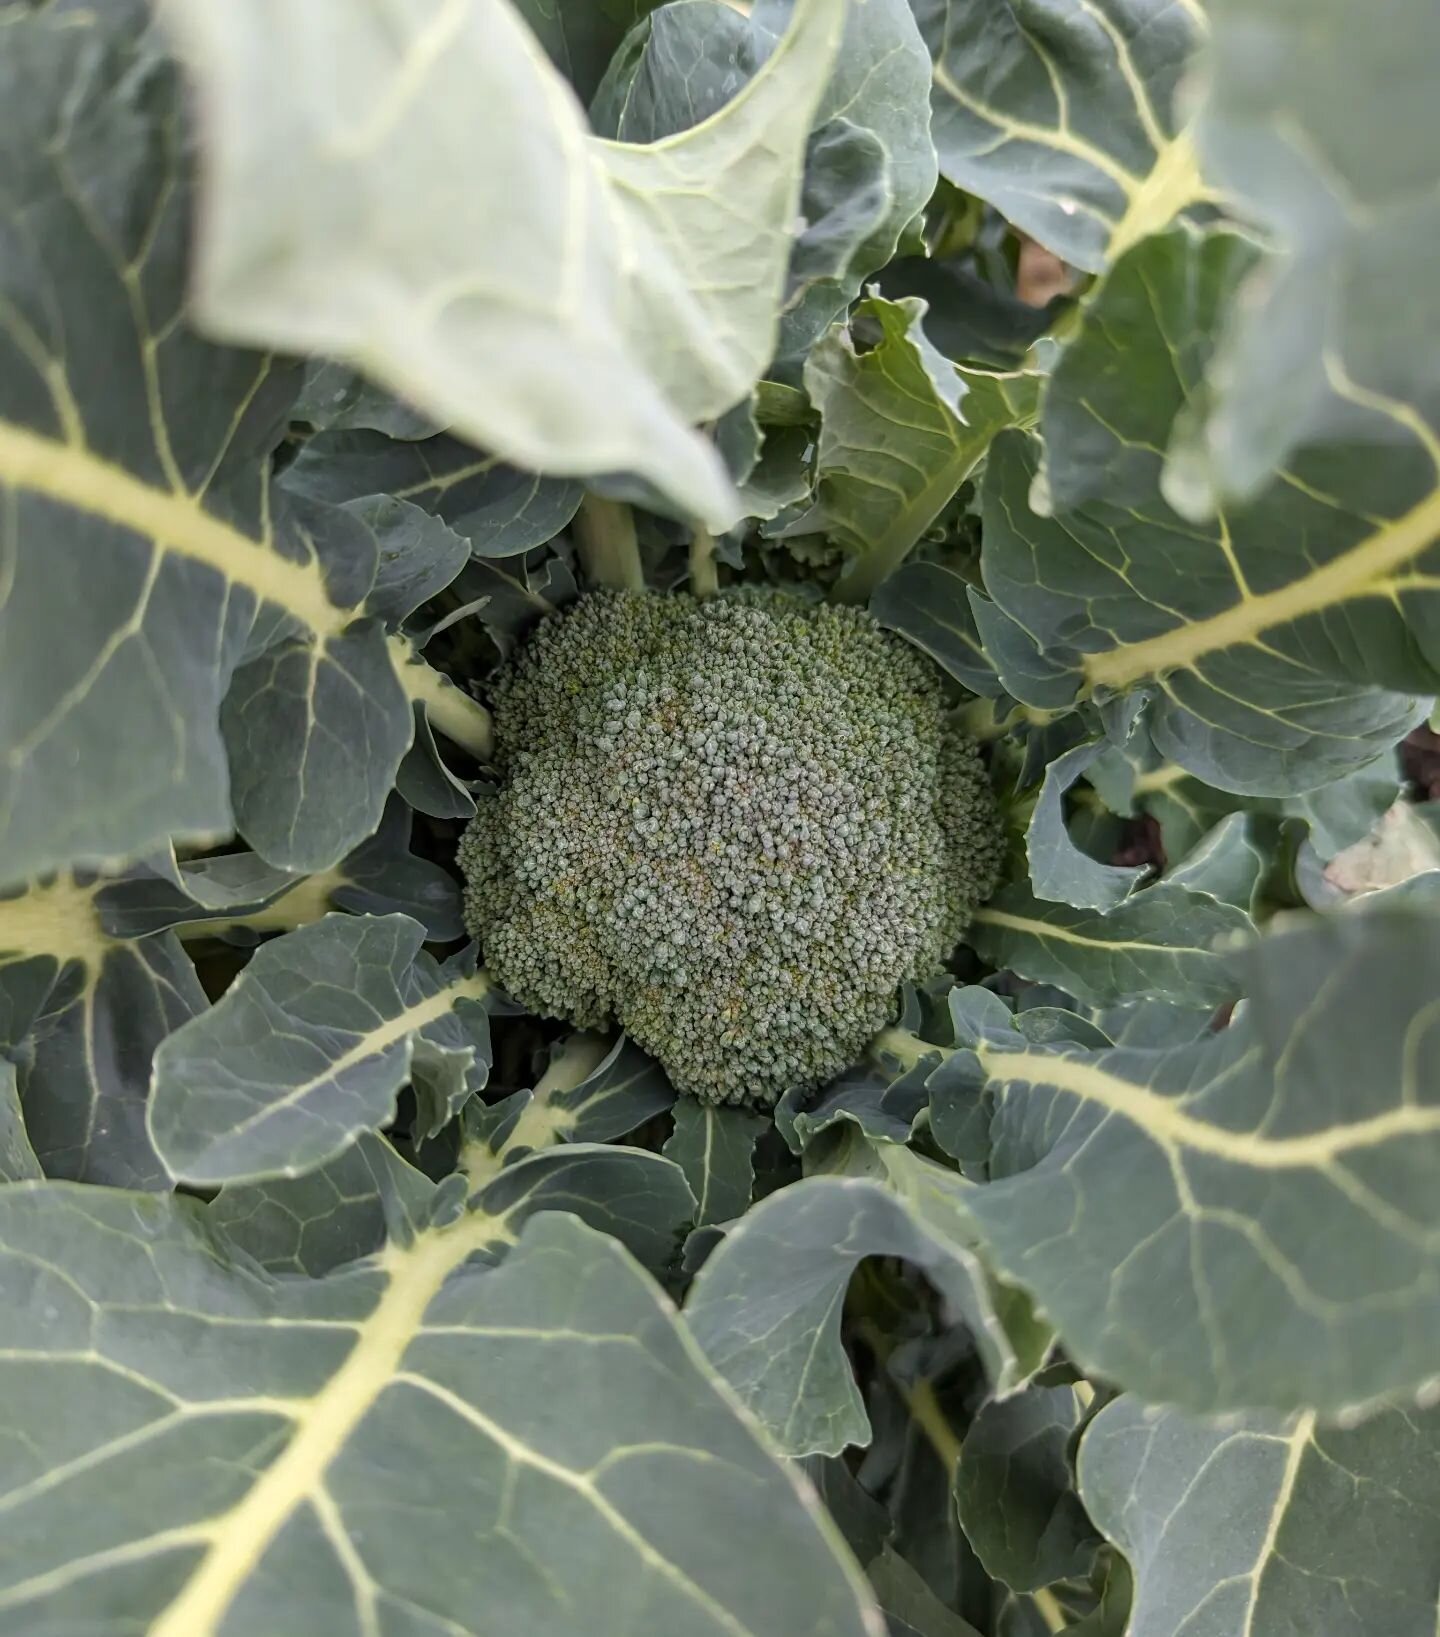 We planted some broccoli pretty late in the fall season, not really expecting anything out of it. What a cool thing to harvest some heads in January thanks to the mild weather we've had this winter🥦

Sorry! None available for sale😢